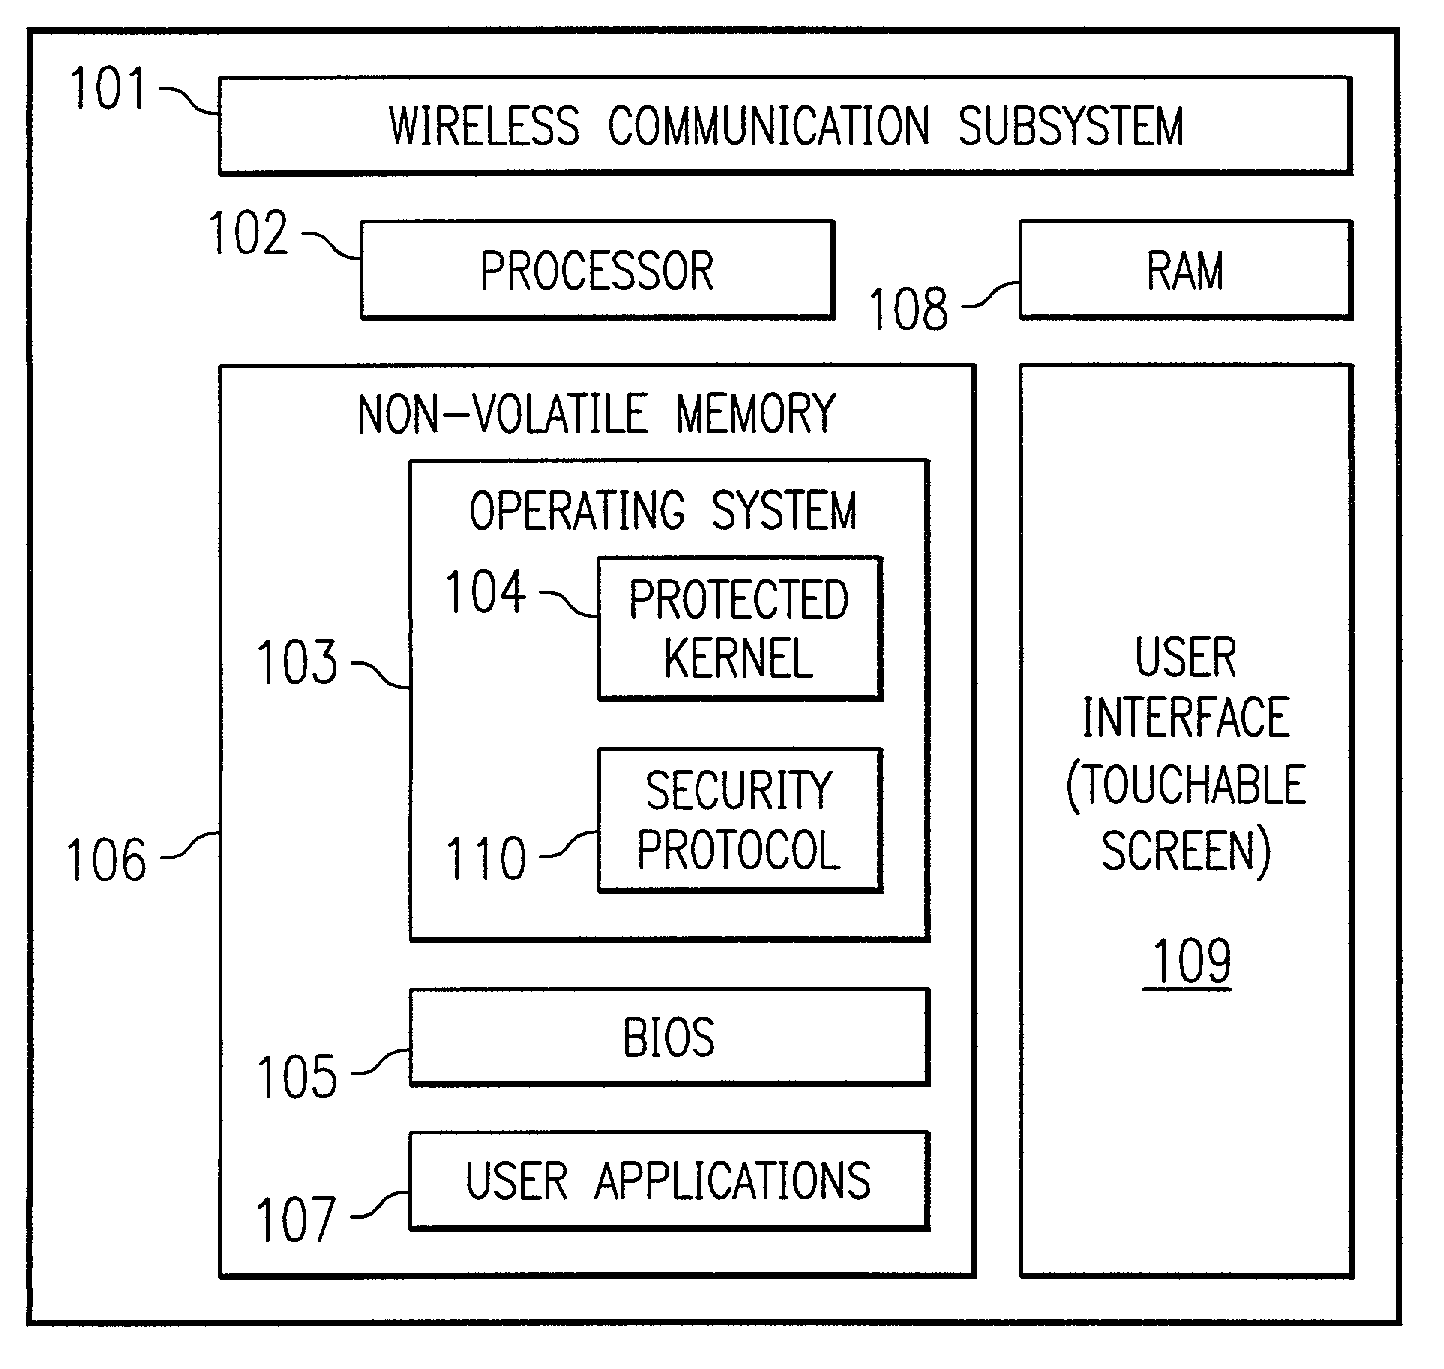 System and method for preventing use of a wireless device